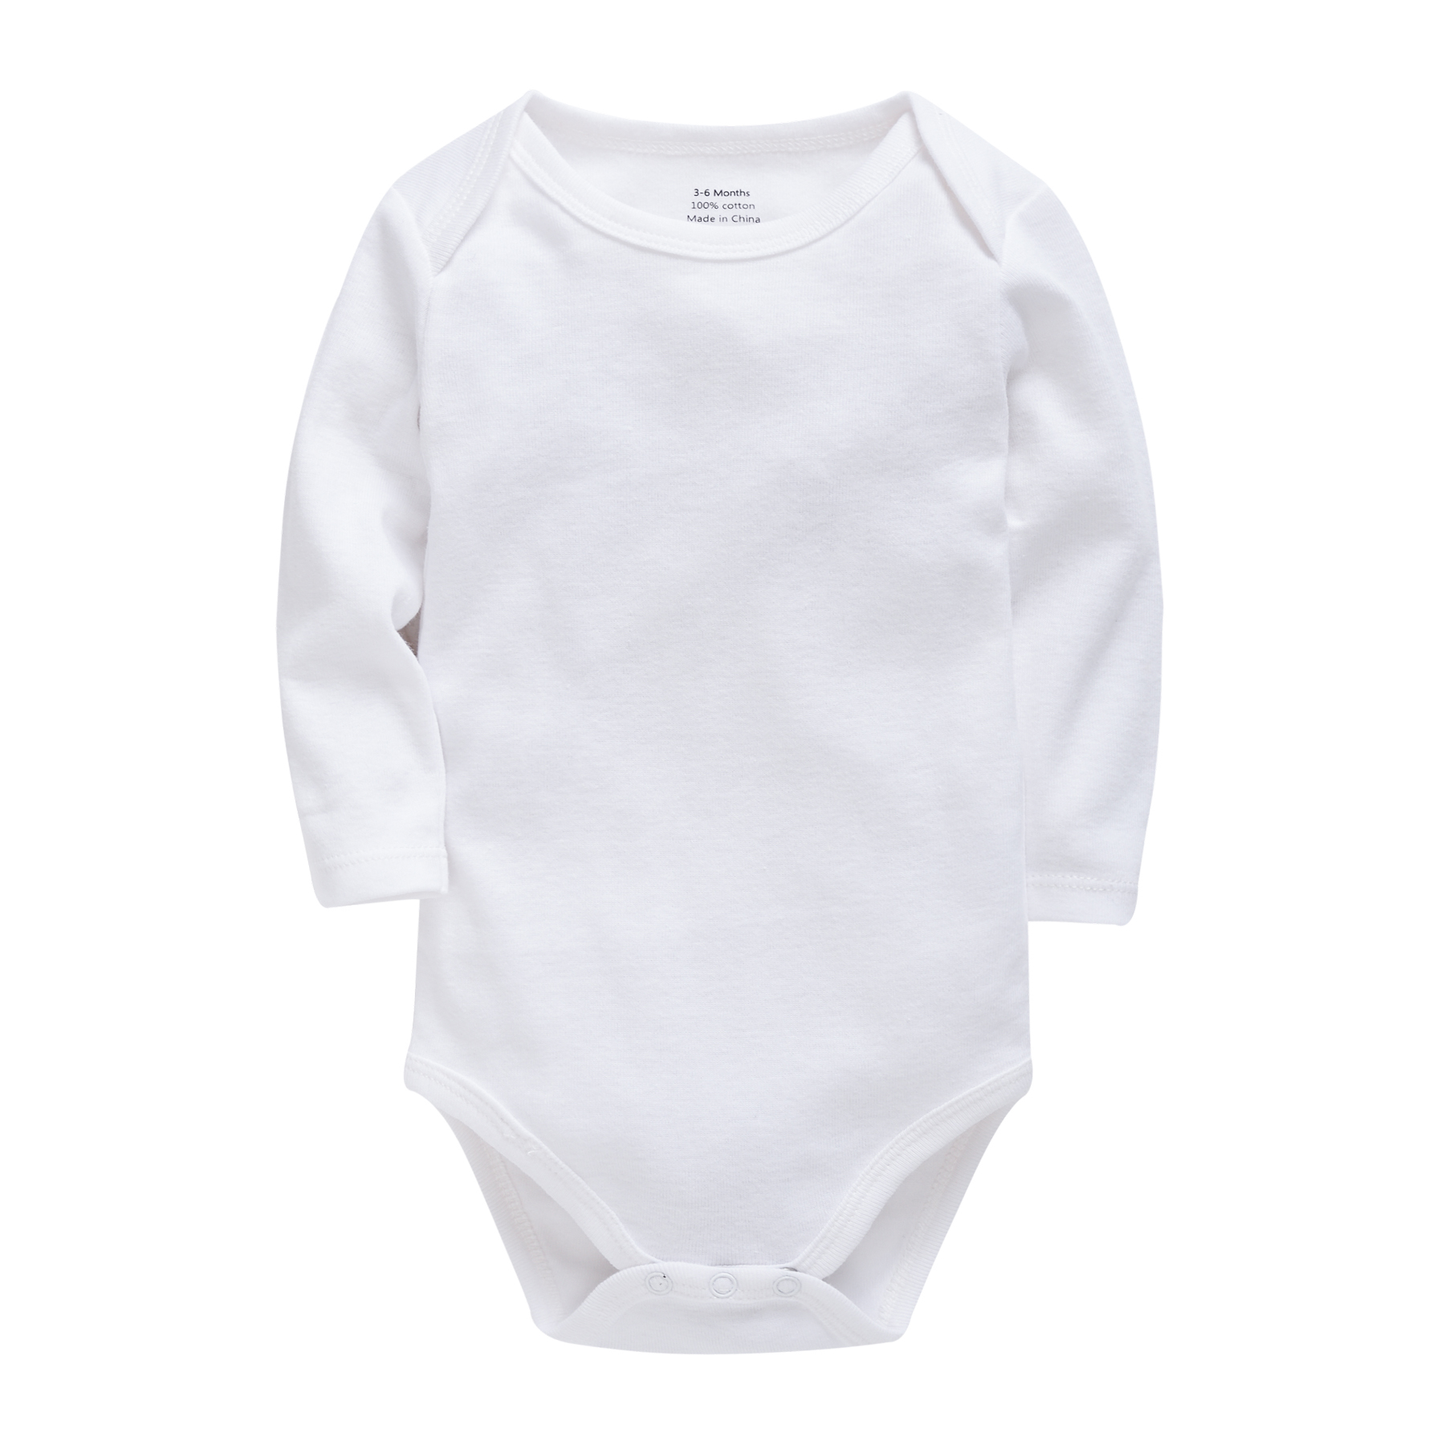 Baby Body Classic White at titchytastic